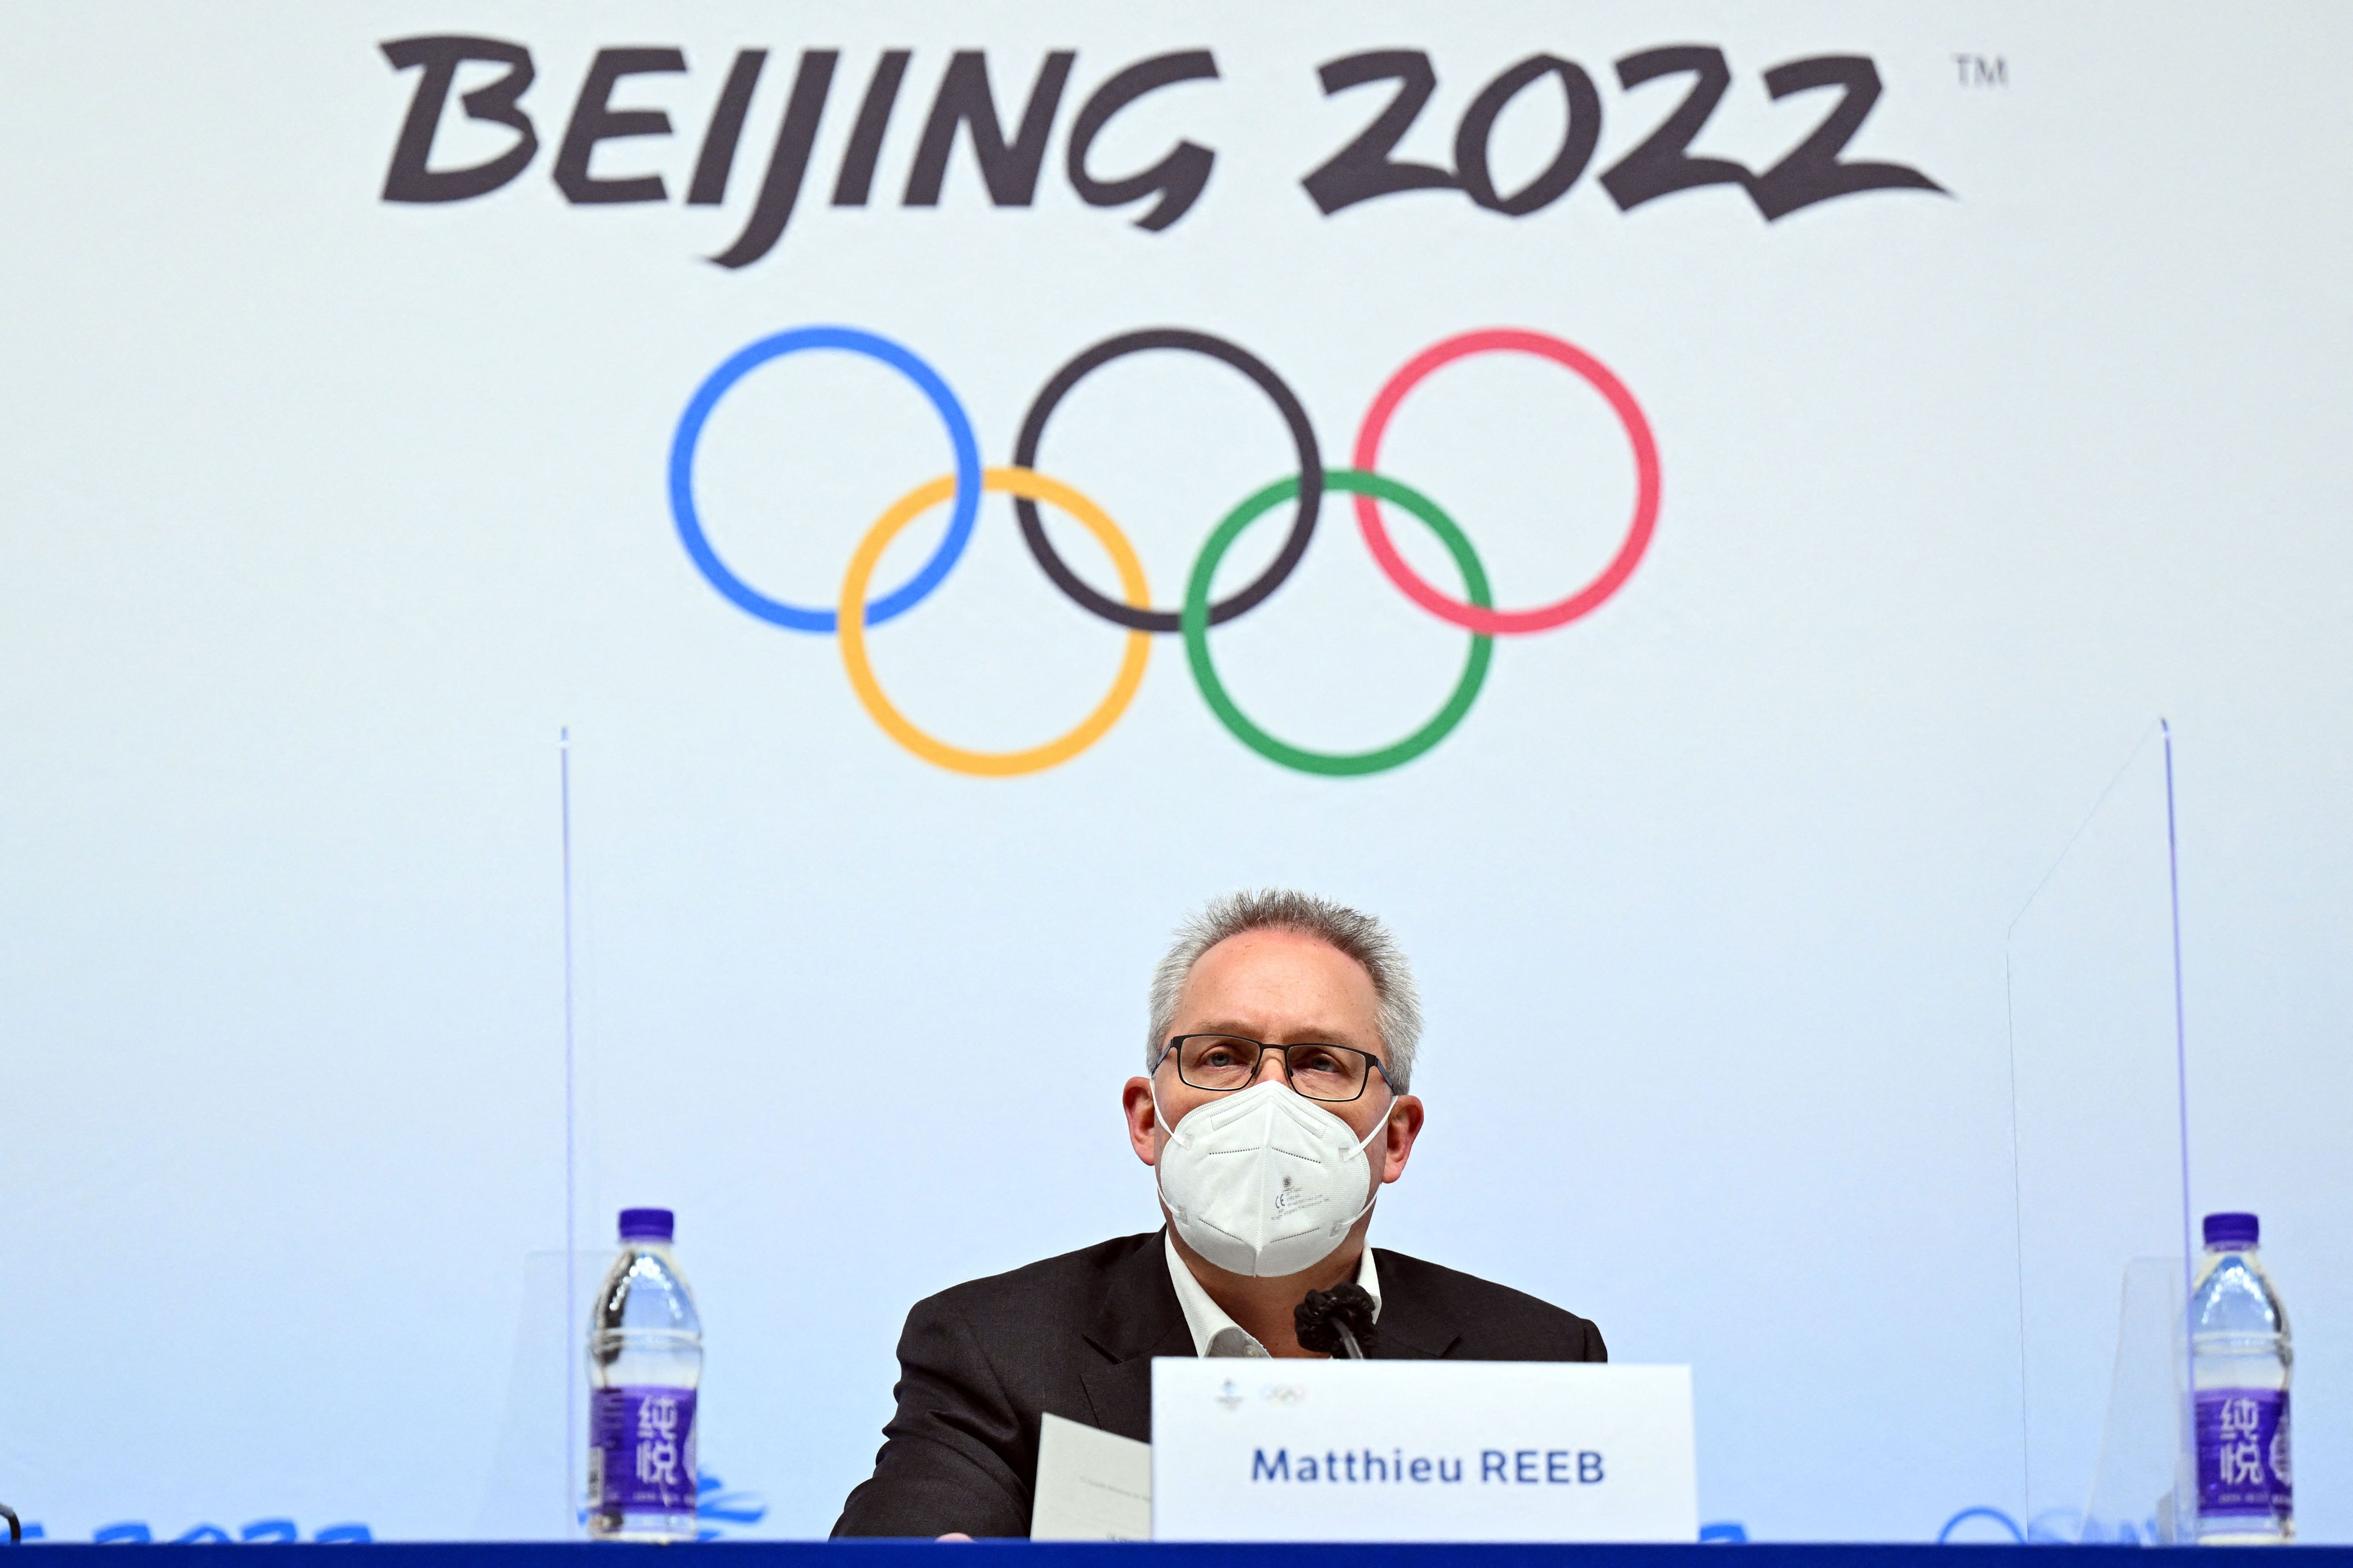 Court of Arbitration for Sport director general Matthieu Reeb at a news conference at the Beijing Winter Olympics Media Center on Monday.